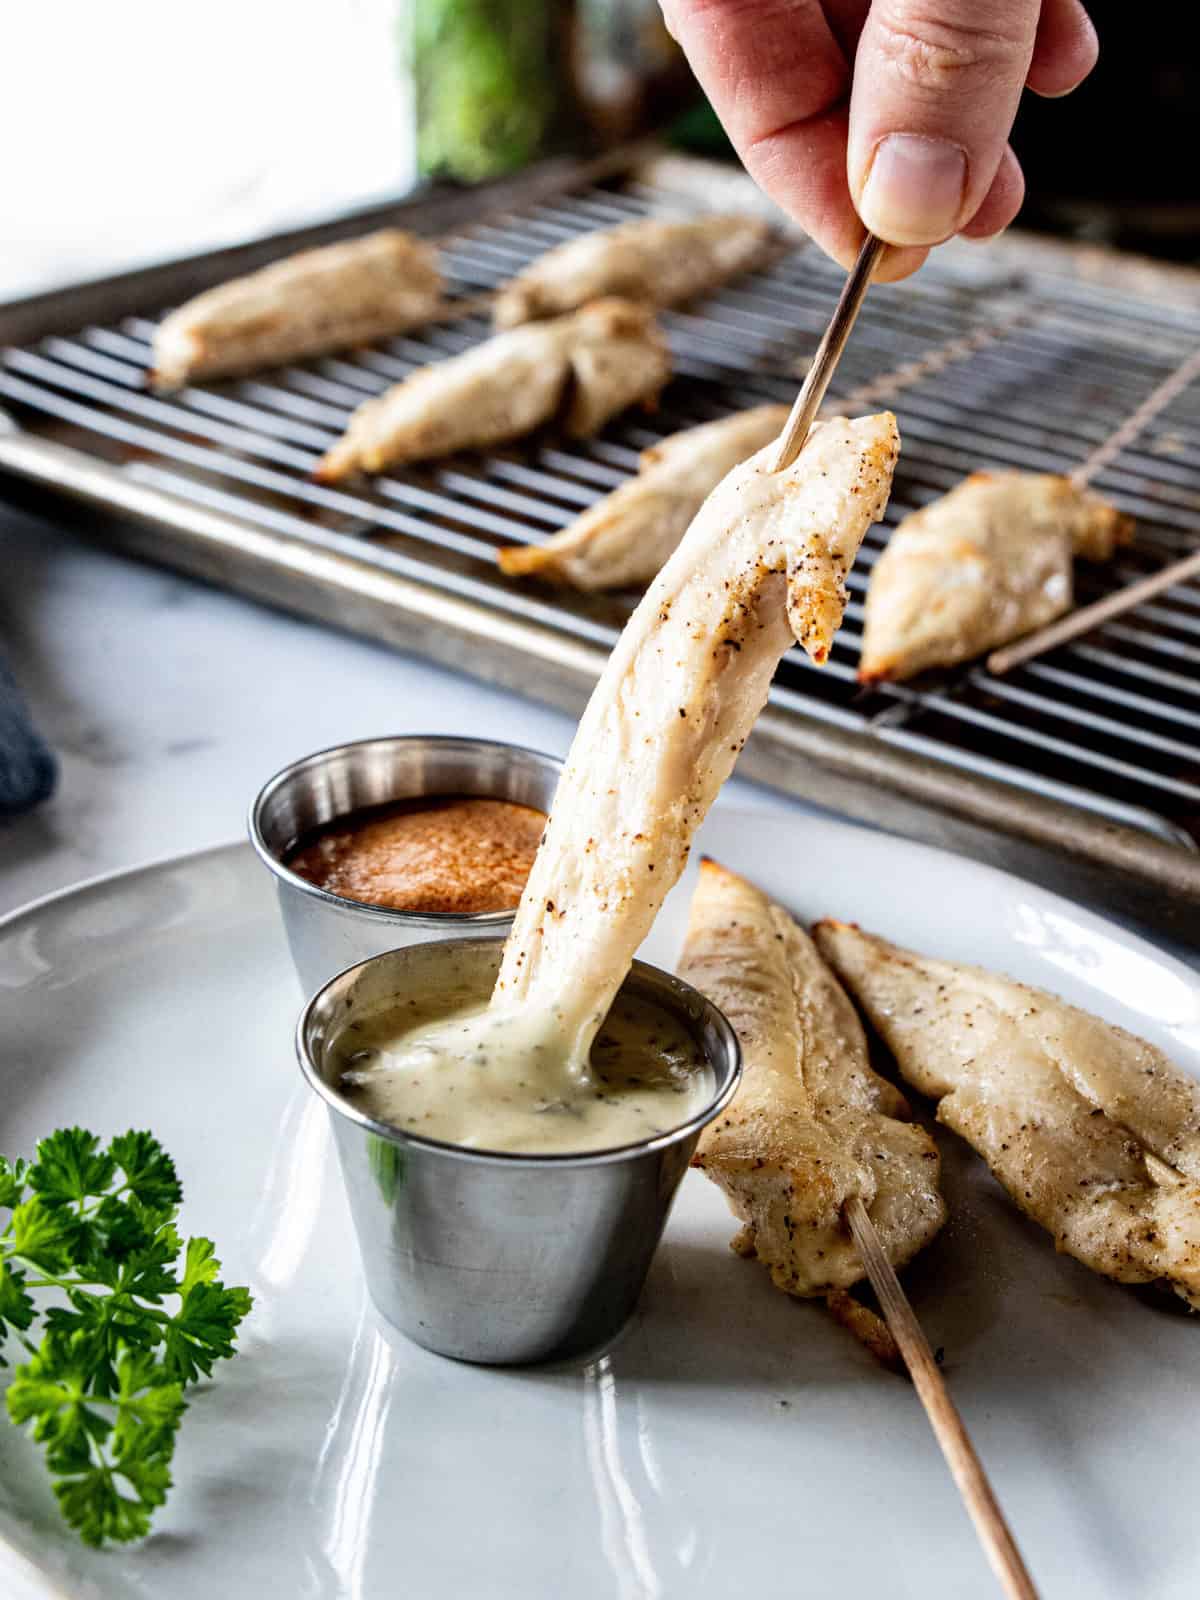 Chicken on a stick being shown dipped into a ramekin filled with a dipping sauce. 